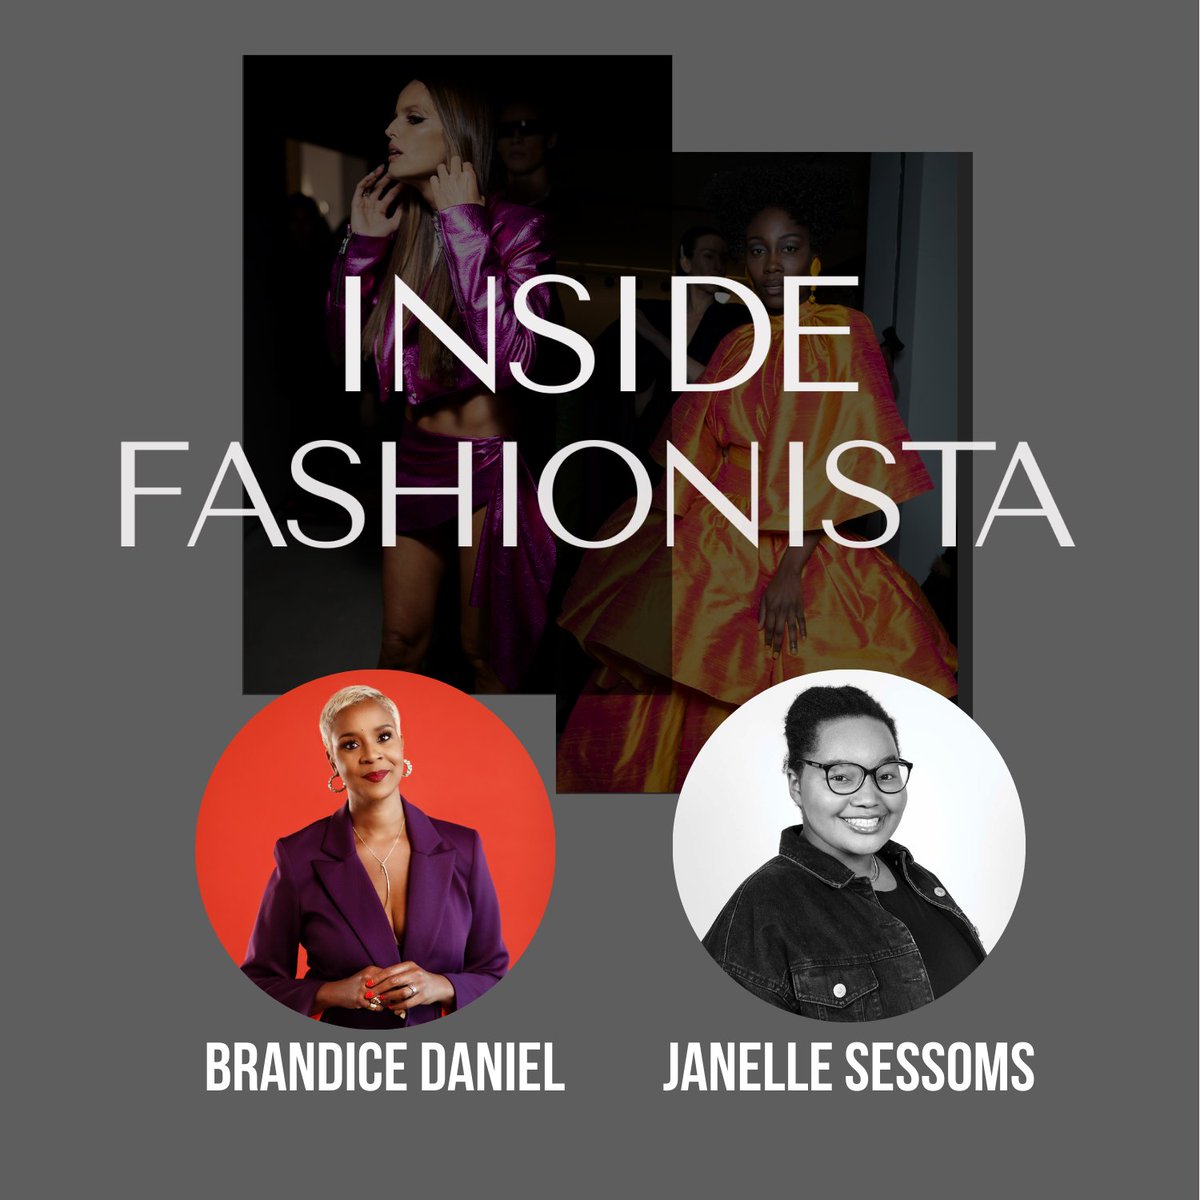 Discover how @brandicedaniel, founder & CEO of Harlem's Fashion Row, is championing designers of color and shaping the future of inclusivity in fashion. 
Live on the Fashionista Network, Tuesday, April 30th, 2:30pm ET. f.chat/yrLL 

#thefashionistanetwork